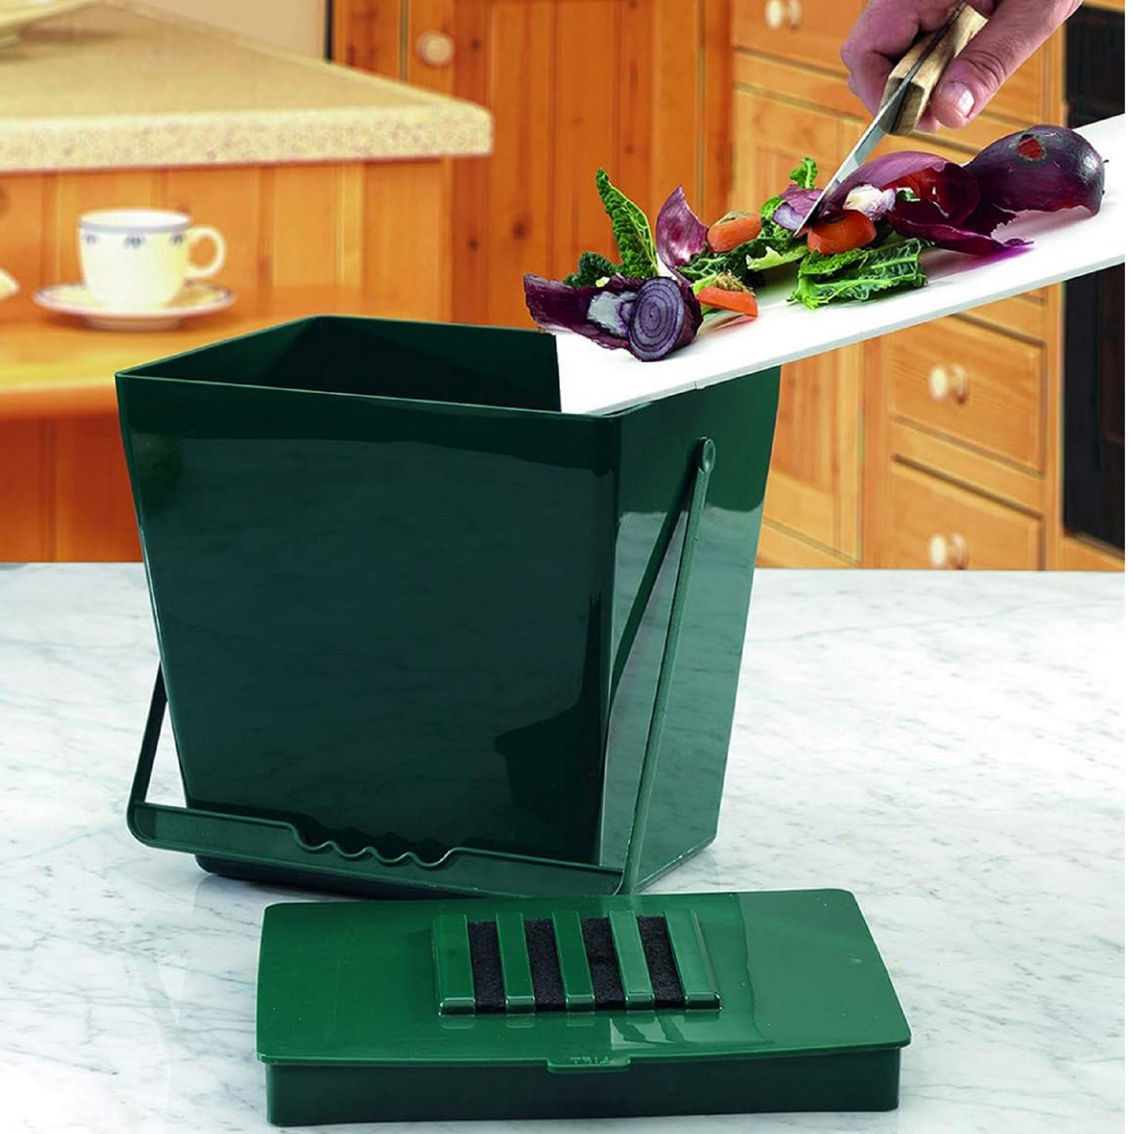 Bosmere English Garden 1.3 gal. Odor Free Plastic Kitchen Compost Caddy with Lid - Image 3 of 3